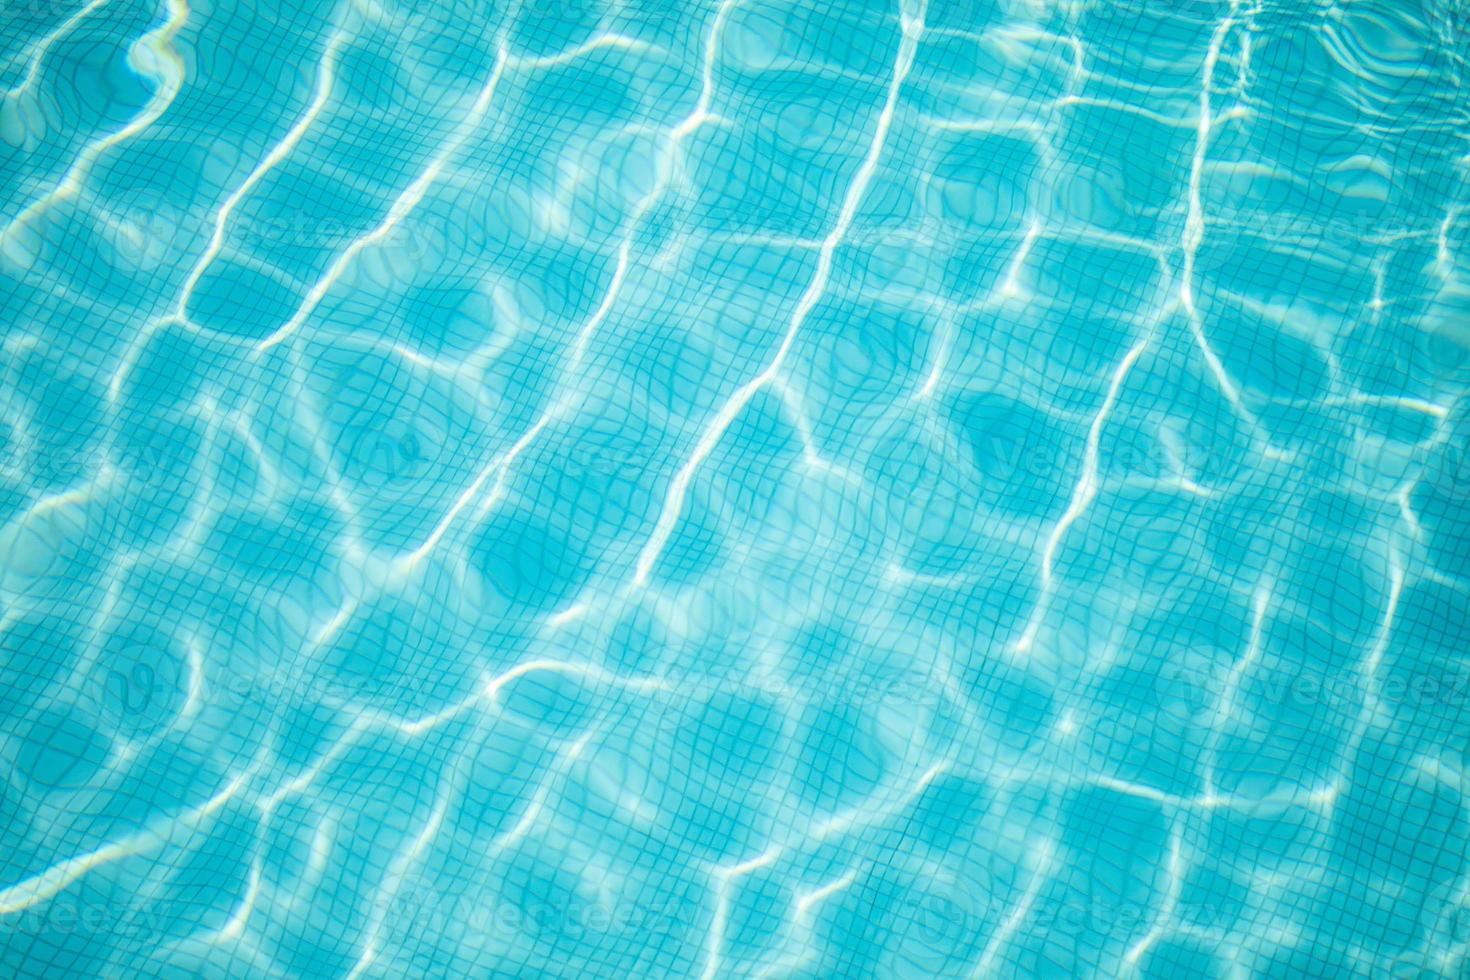 Surface of blue swimming pool, background of water in swimming pool. Summer fun, recreational outdoor activity, sunny blue water surface photo